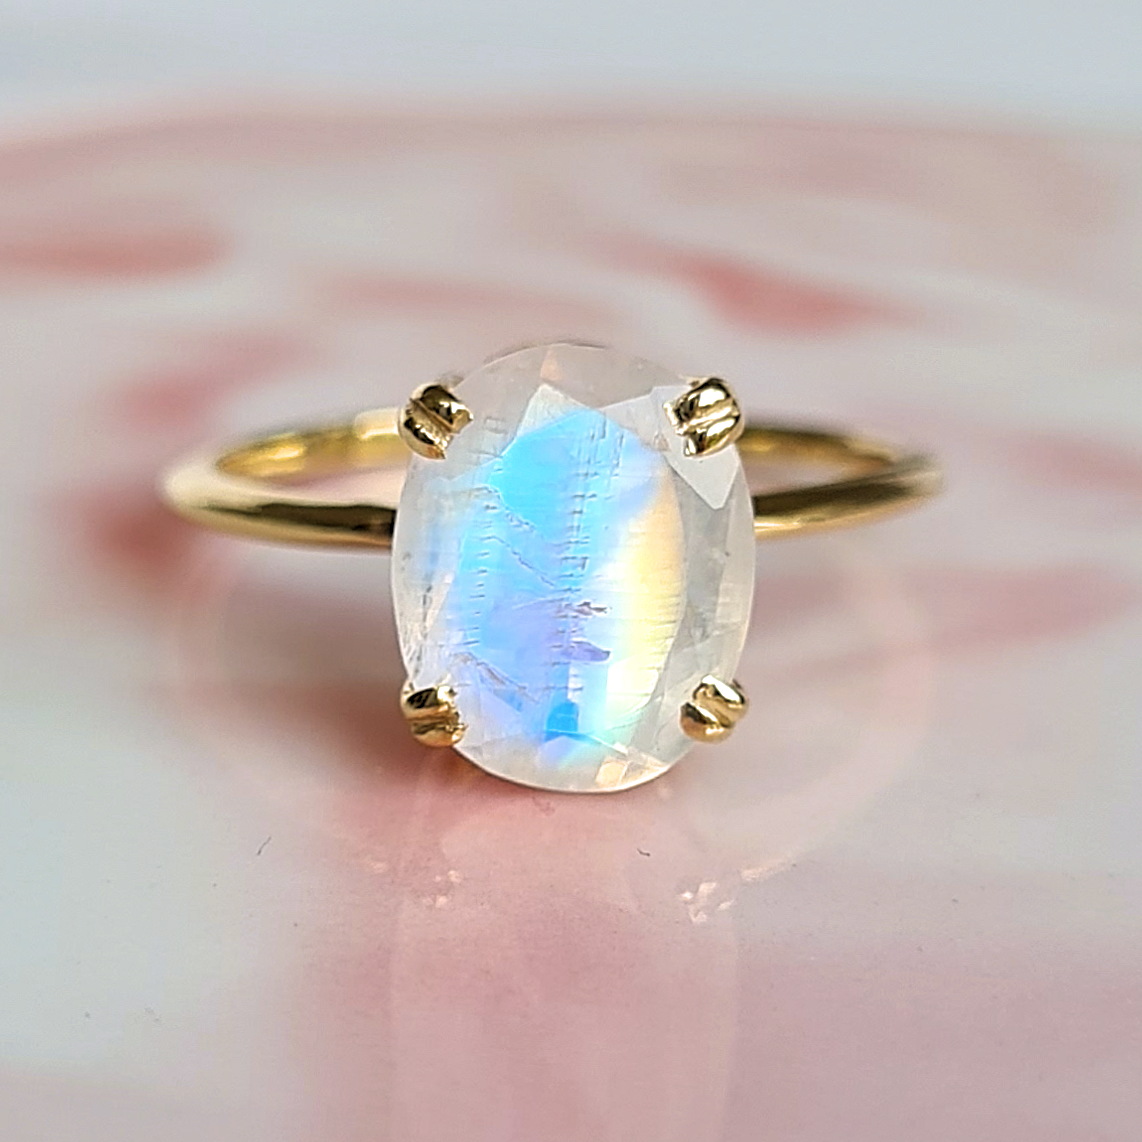 14k Gold Vermeil Oval Cut Rainbow Moonstone Ring - Anniversary, Birthday, Mother's Day Gift for her, Engagement, Gemstone Ring